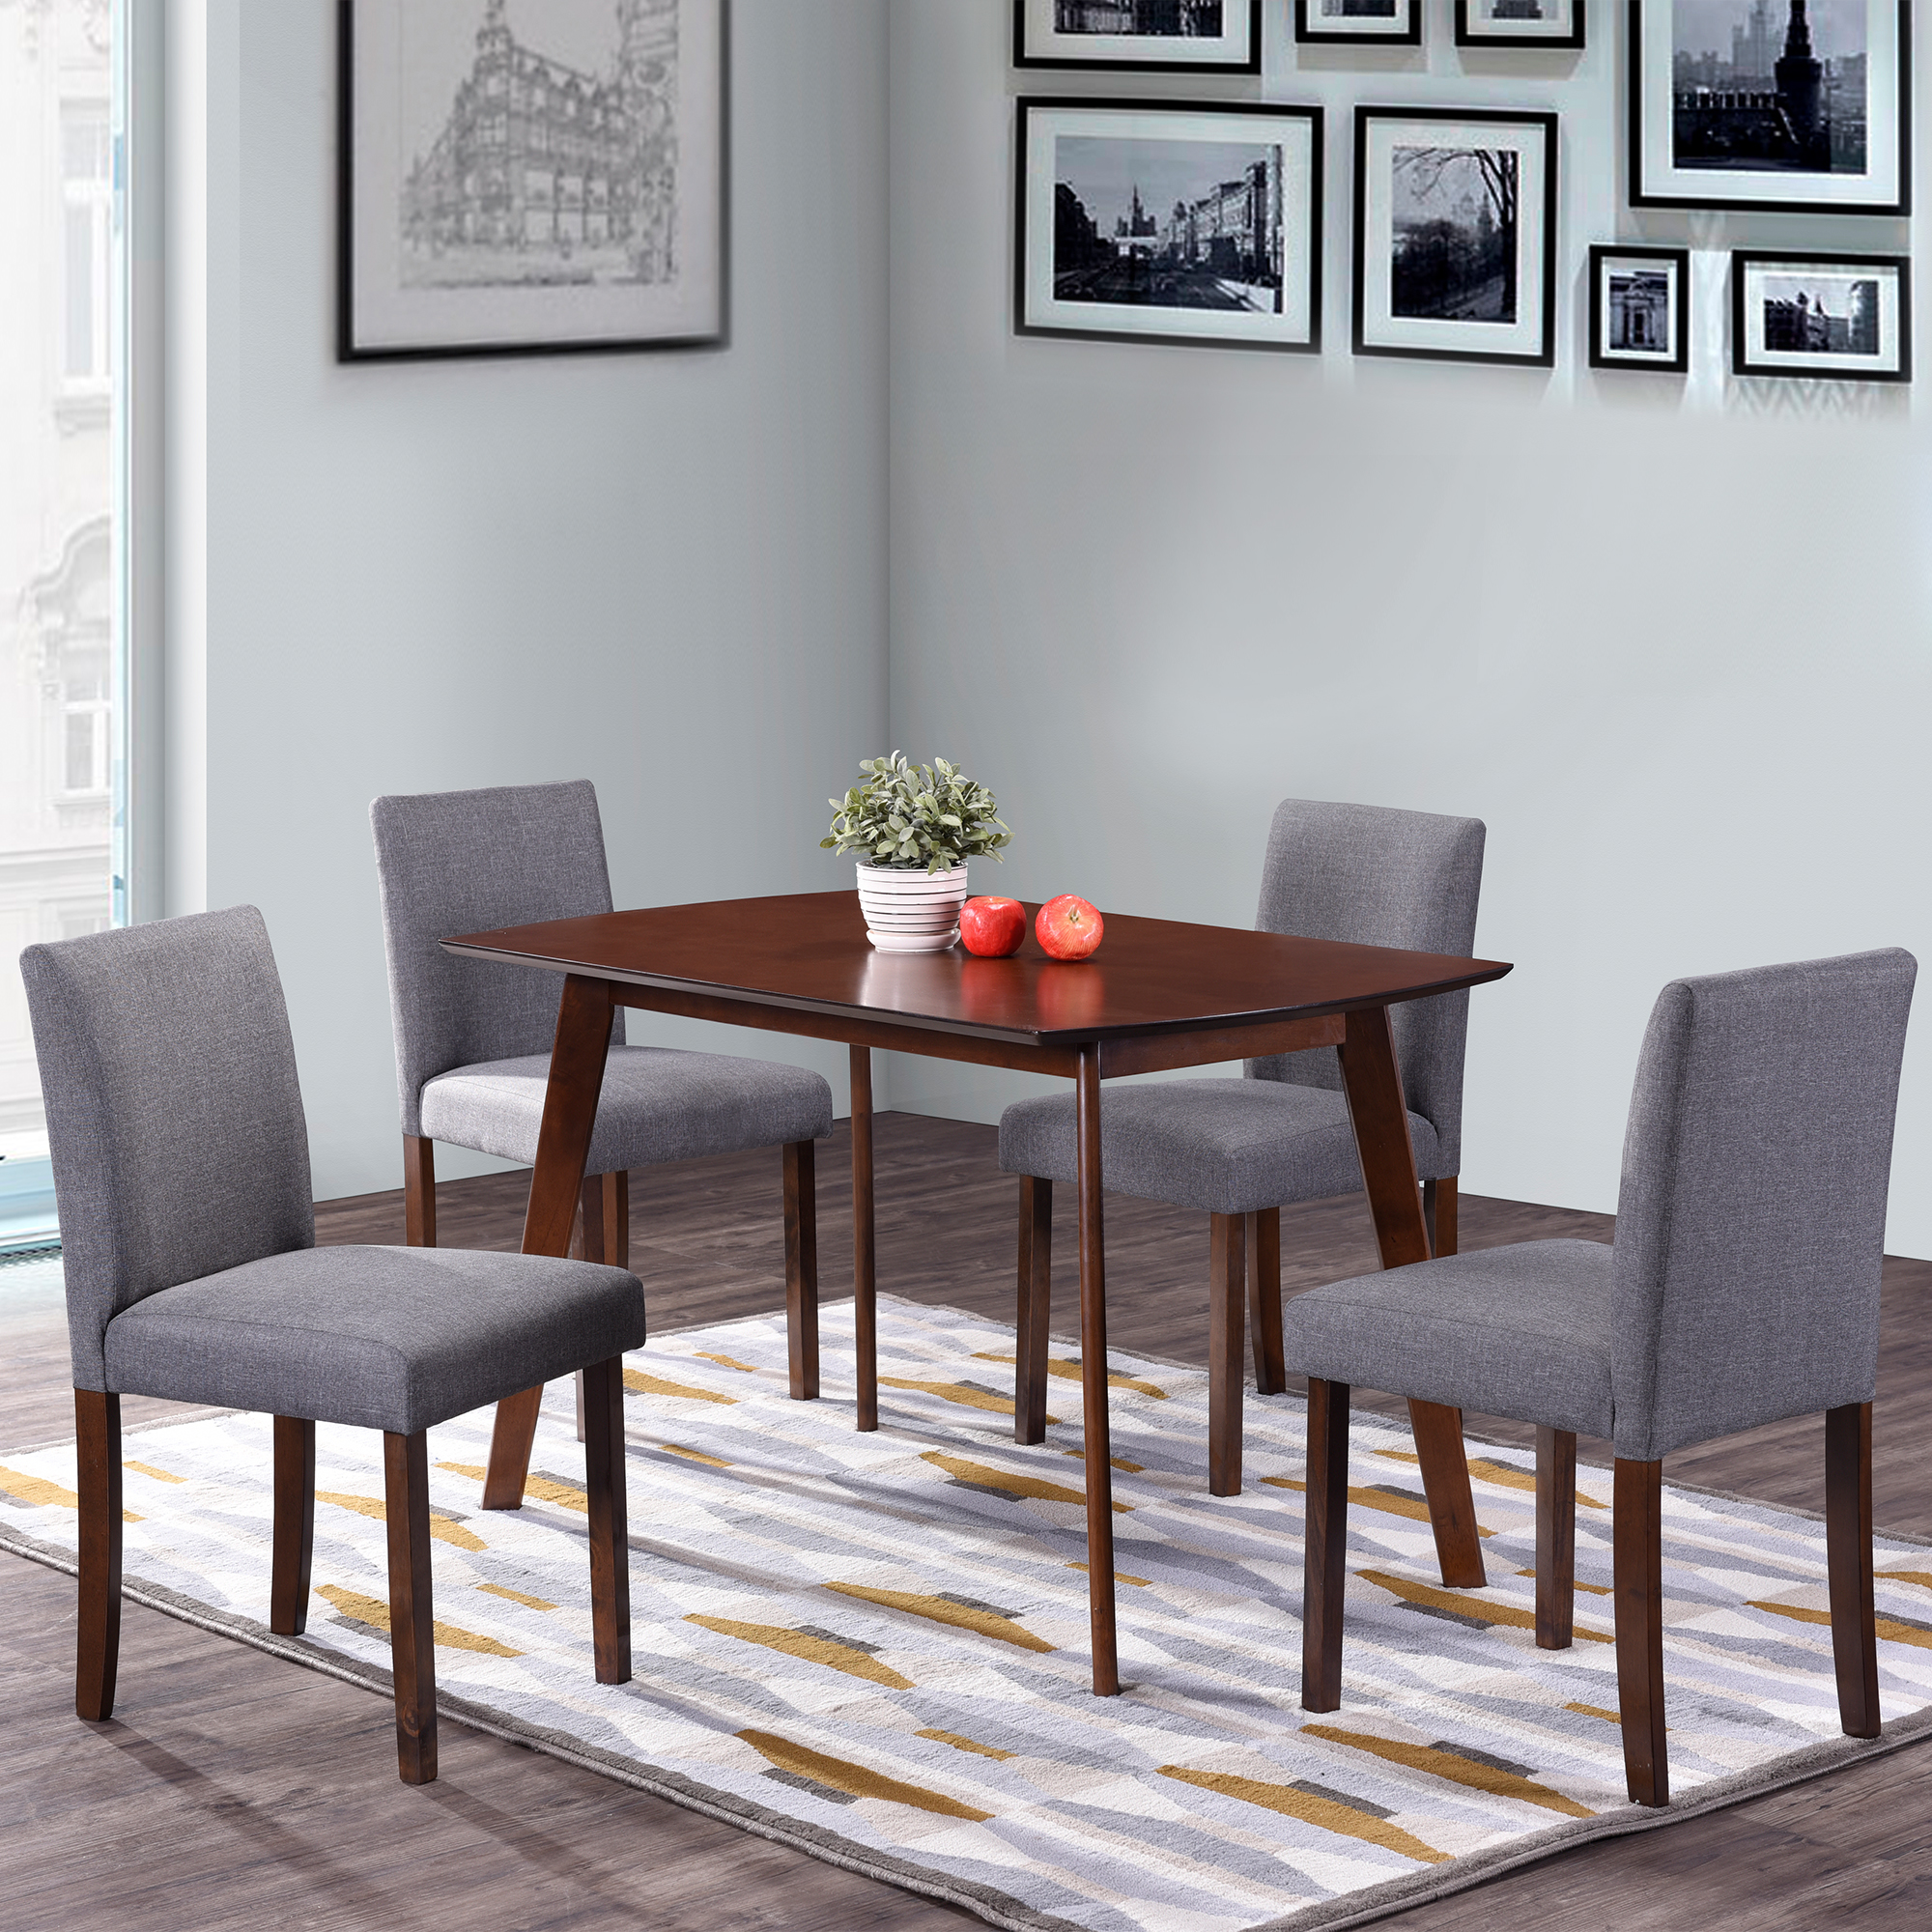 Harper&Bright Designs Wood Table and Upholstered Chairs 5-Piece Dining Set